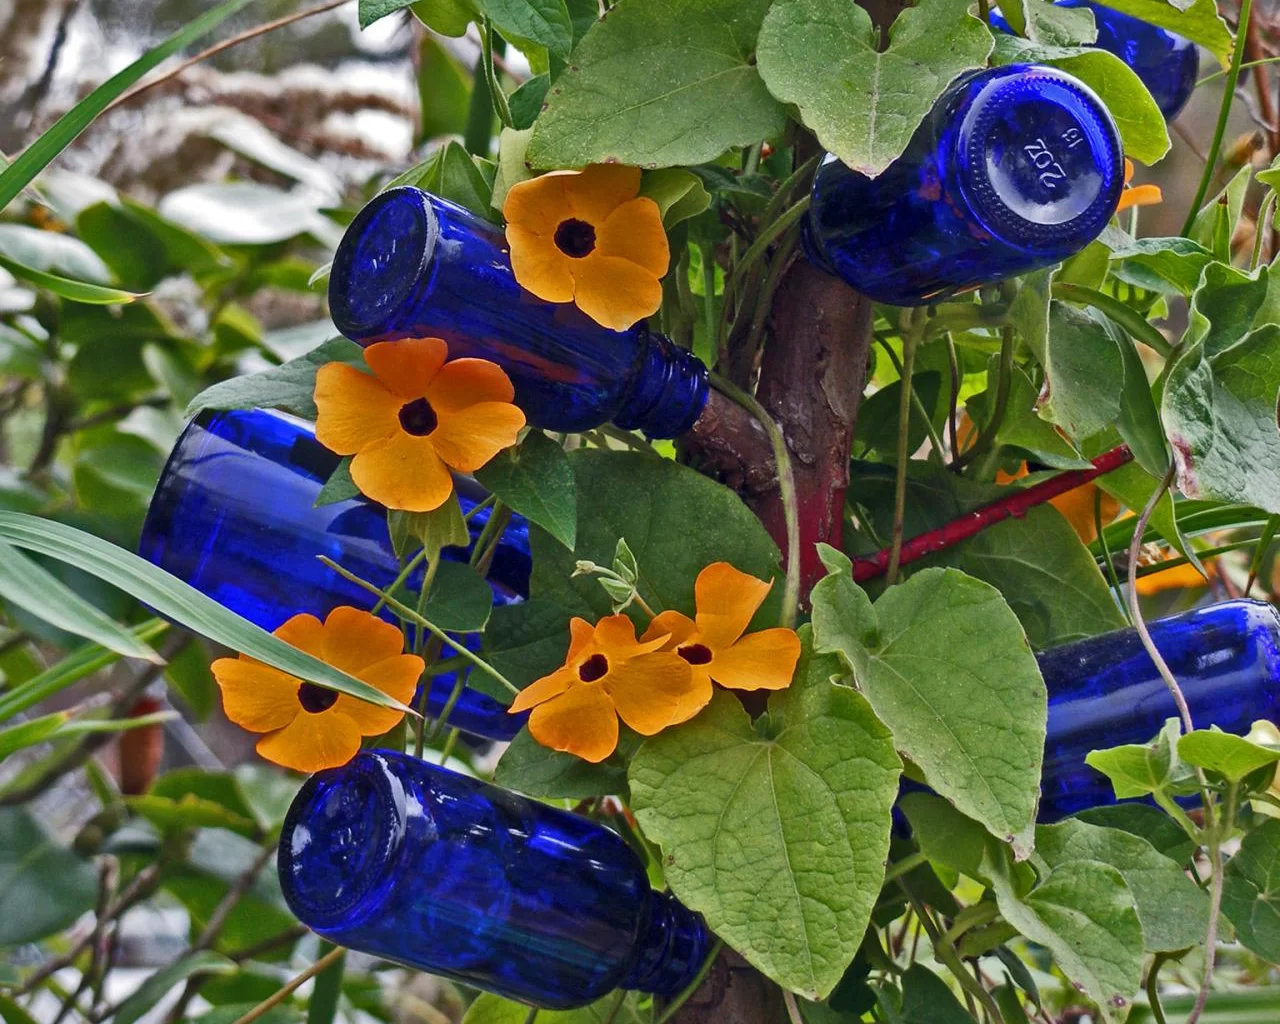 Southern Bottle Trees: A Unique Southern Tradition with Ancient Origins